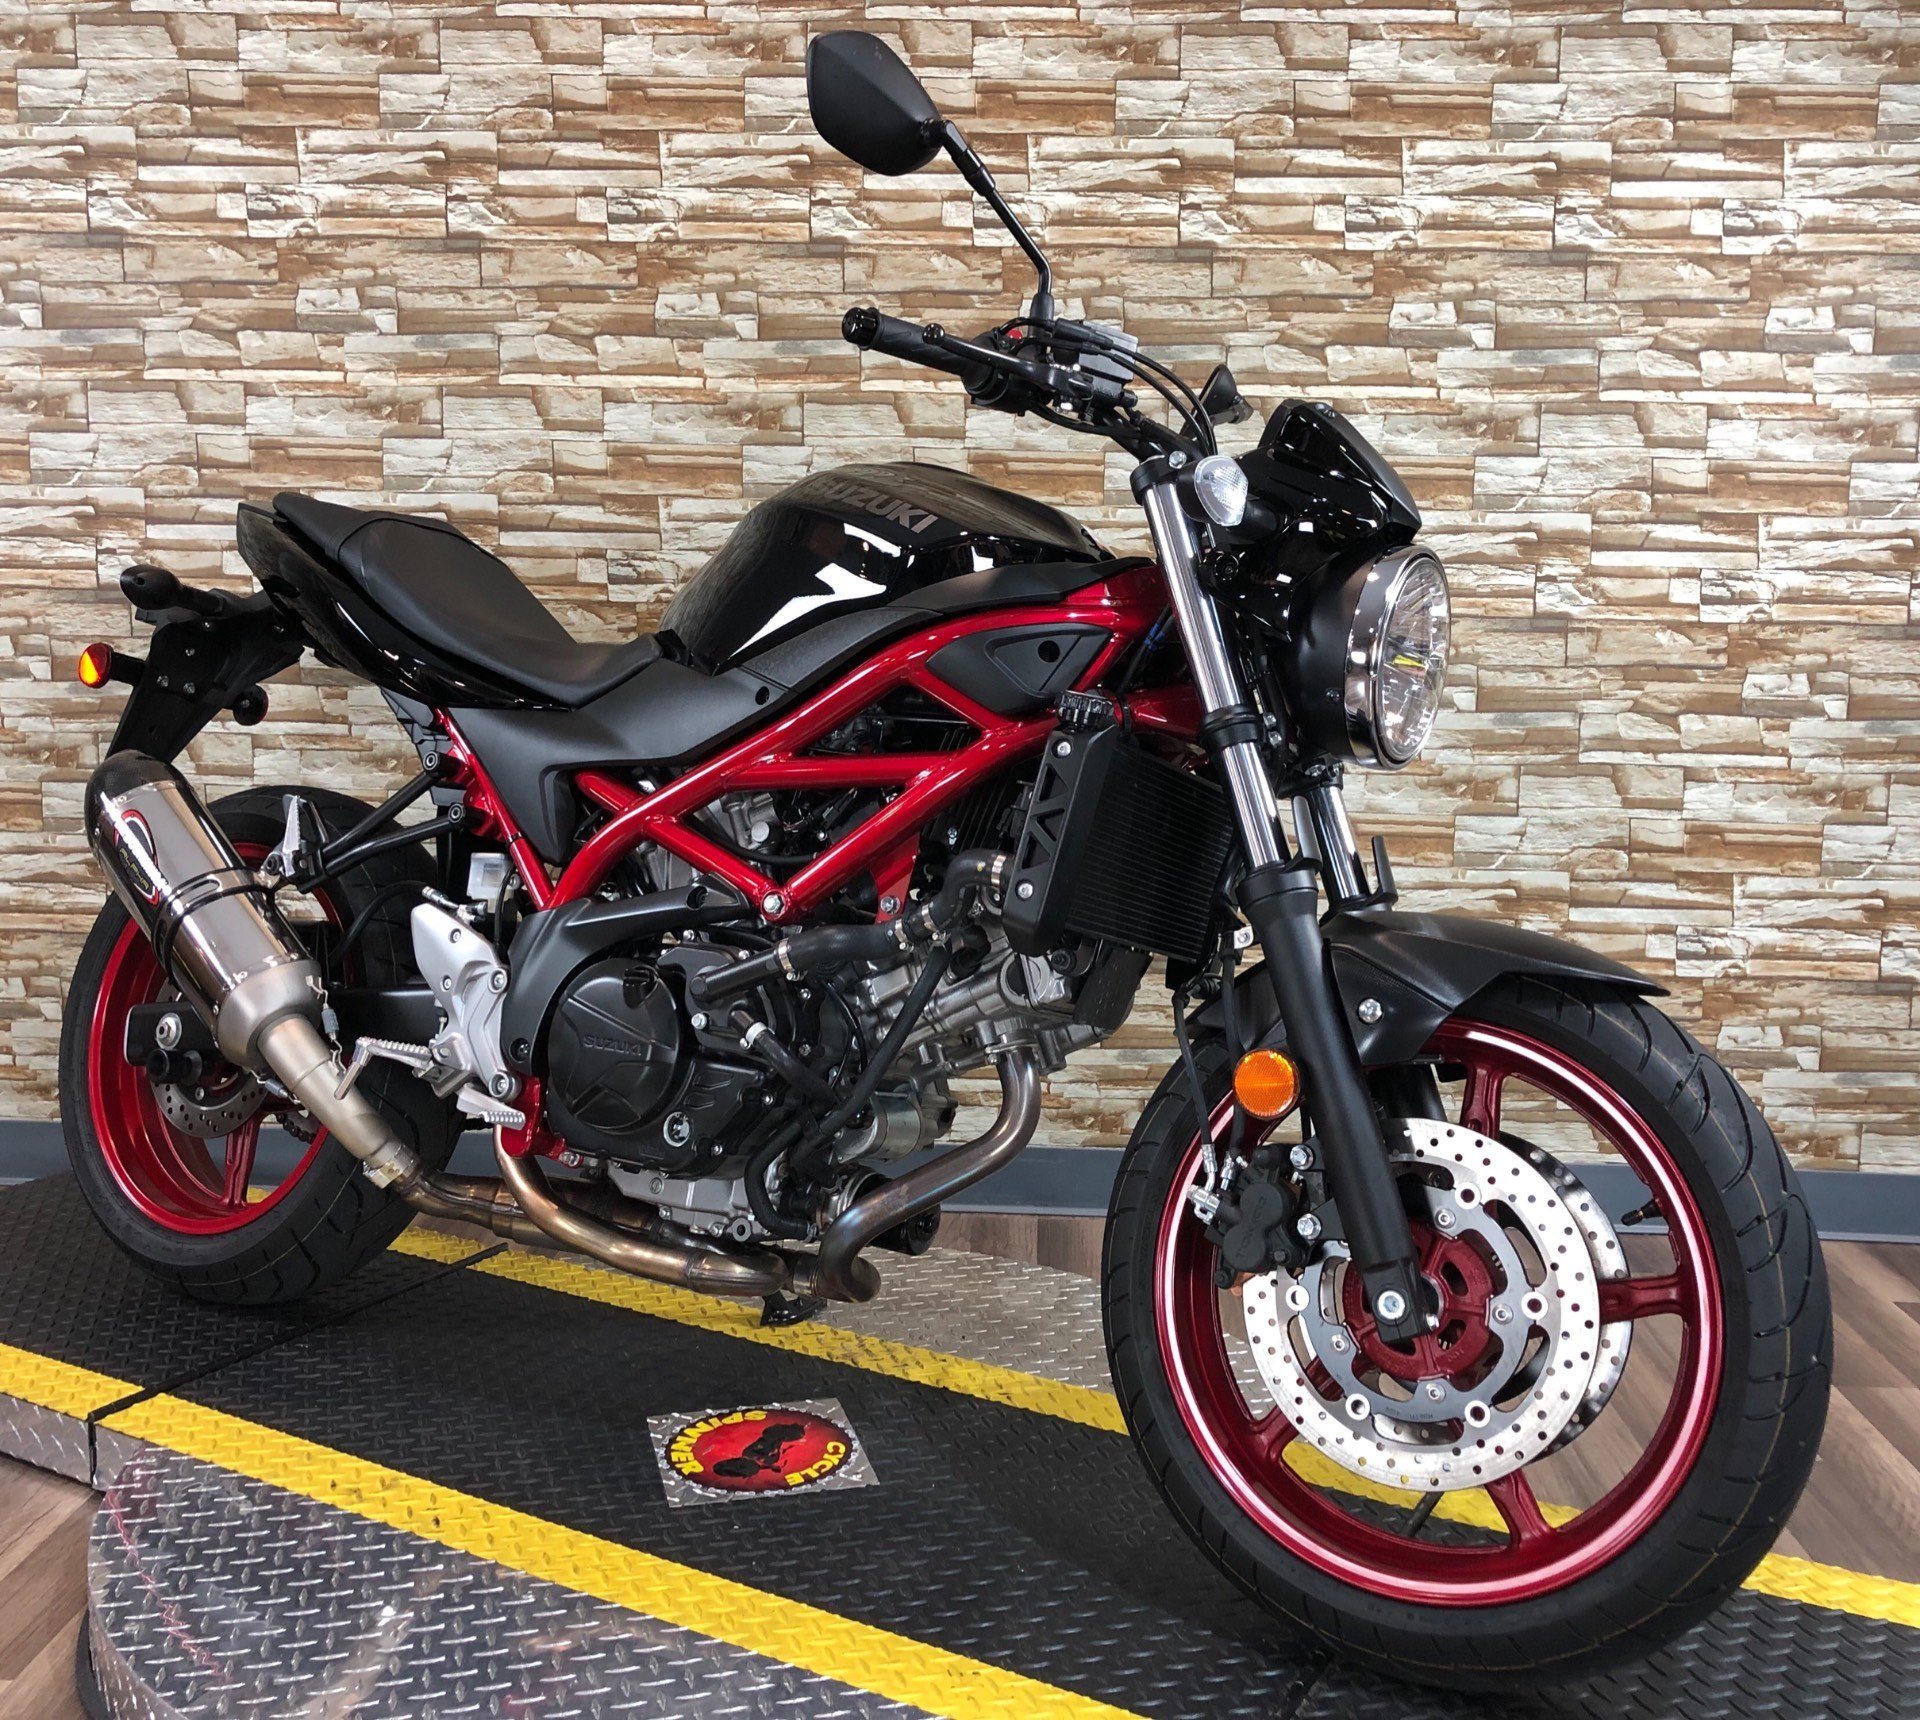 Used 2018 Suzuki SV650 ABS Motorcycles in Port Charlotte